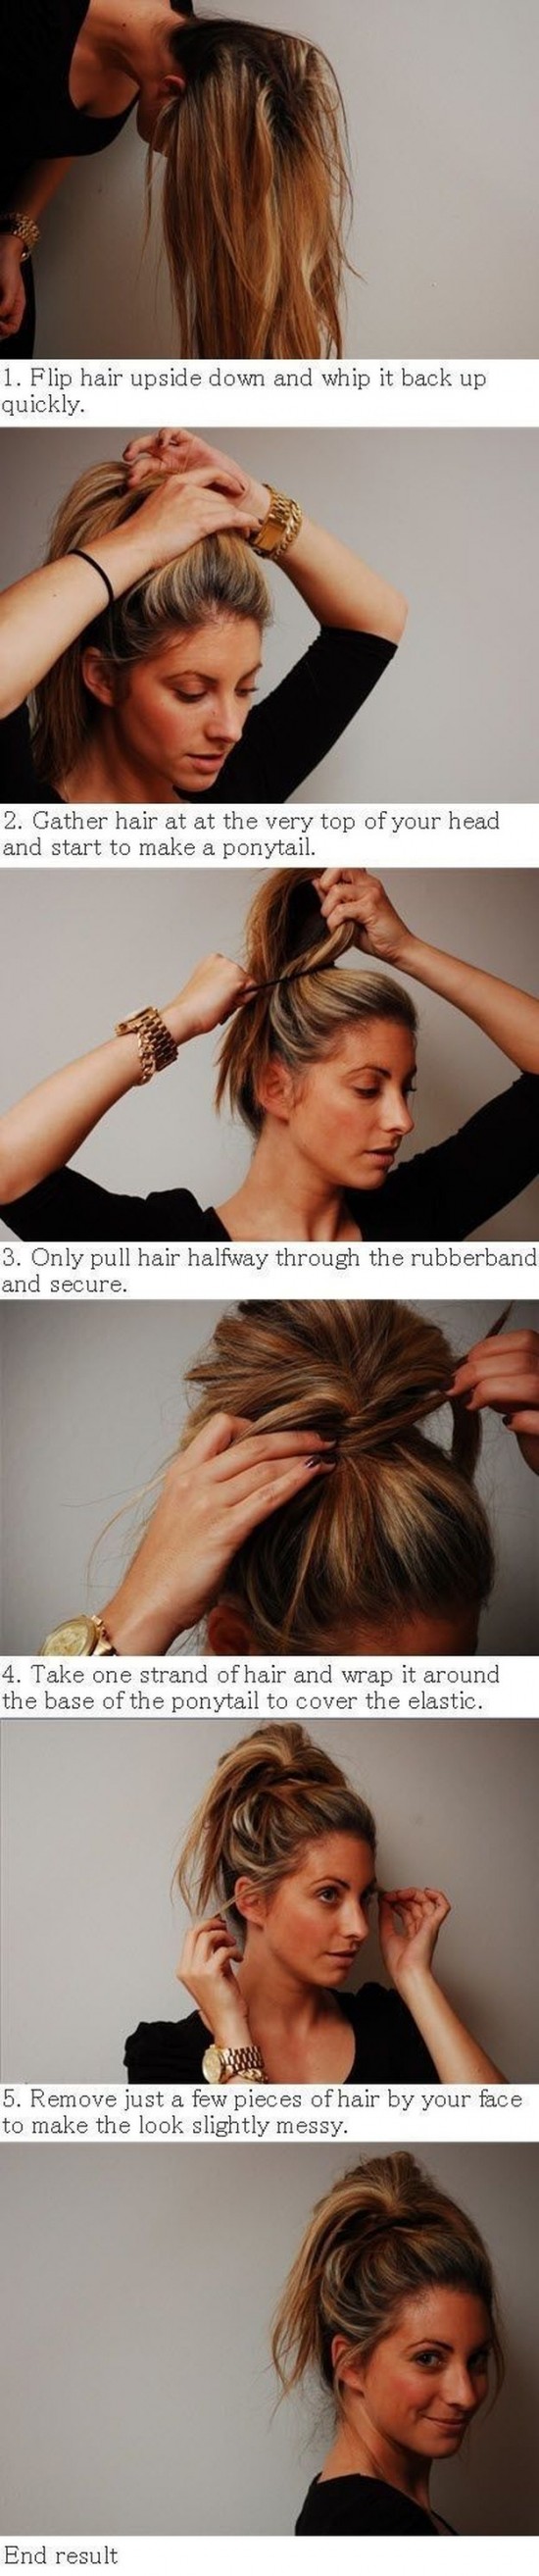 Creative-Hairstyles-That-You-Can-Easily-Do-at-Home-006